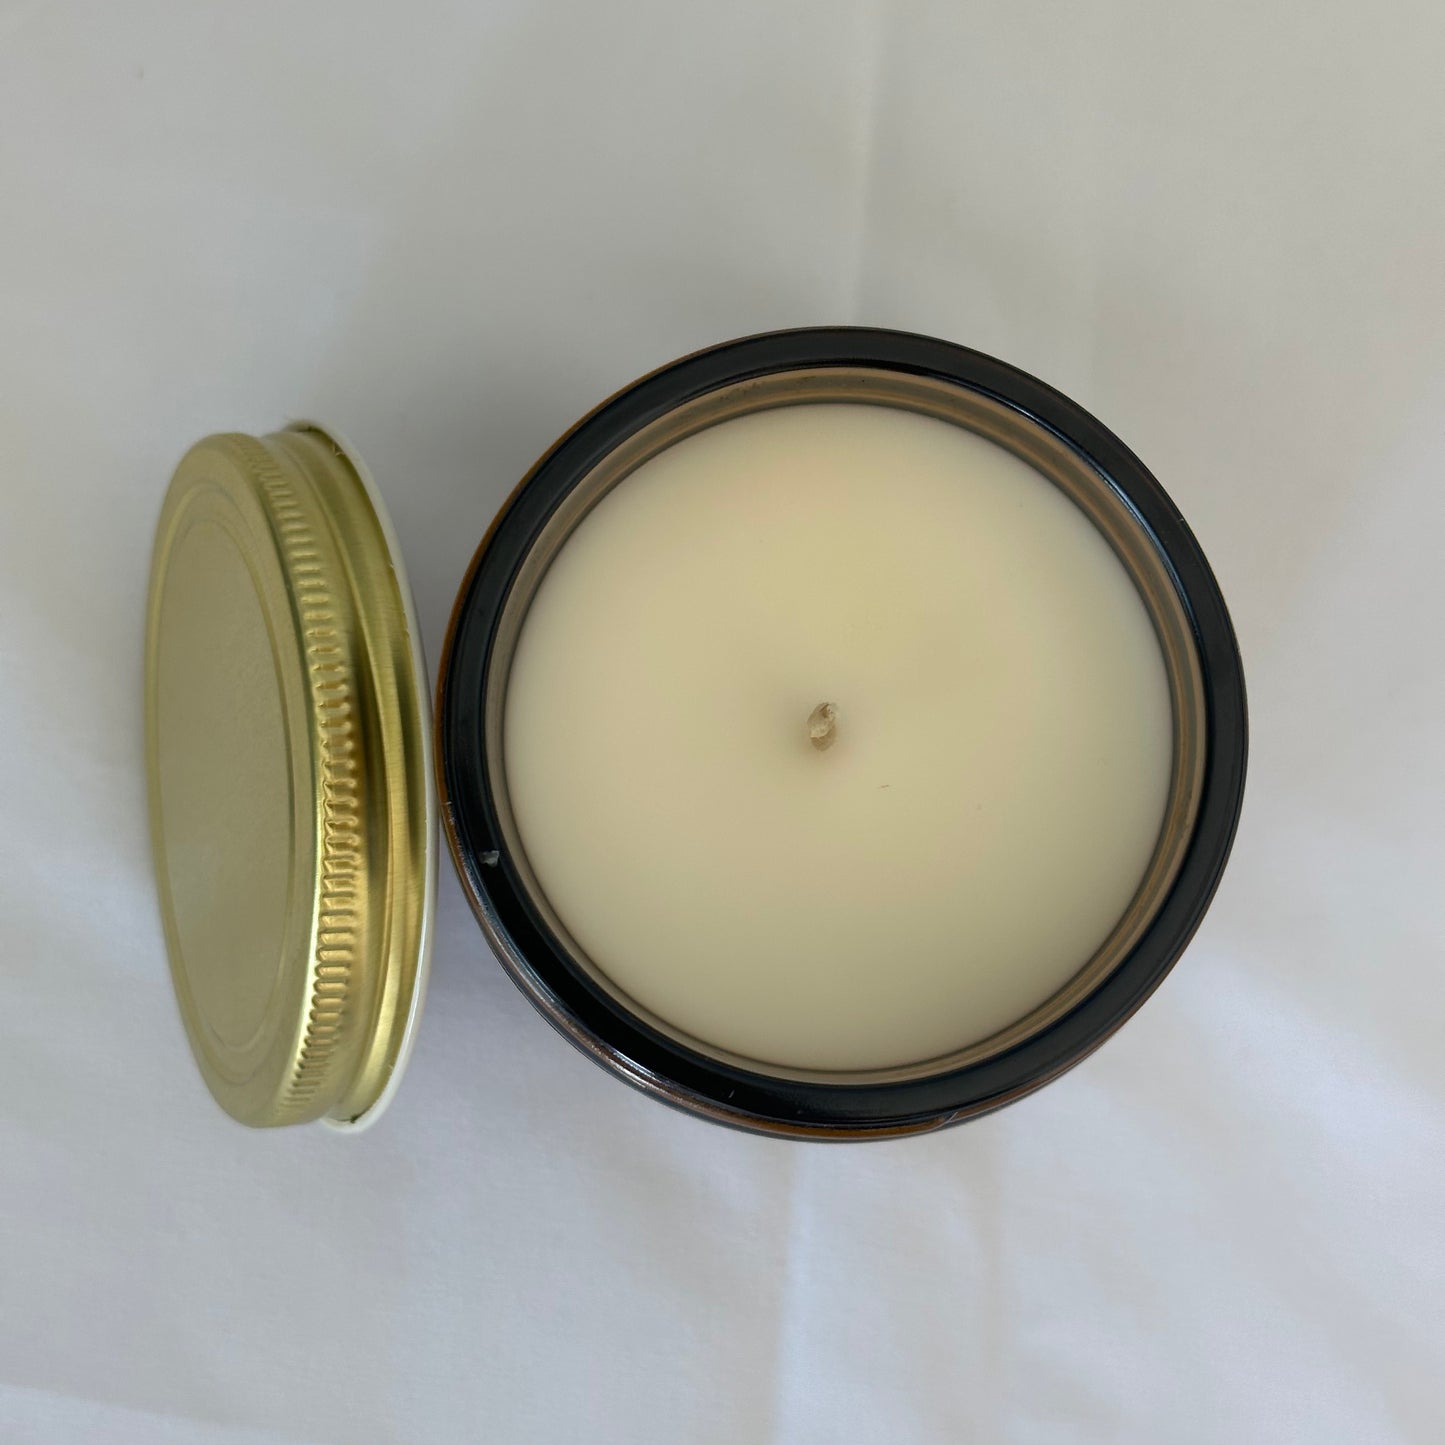 Chai Latte Soy Candle